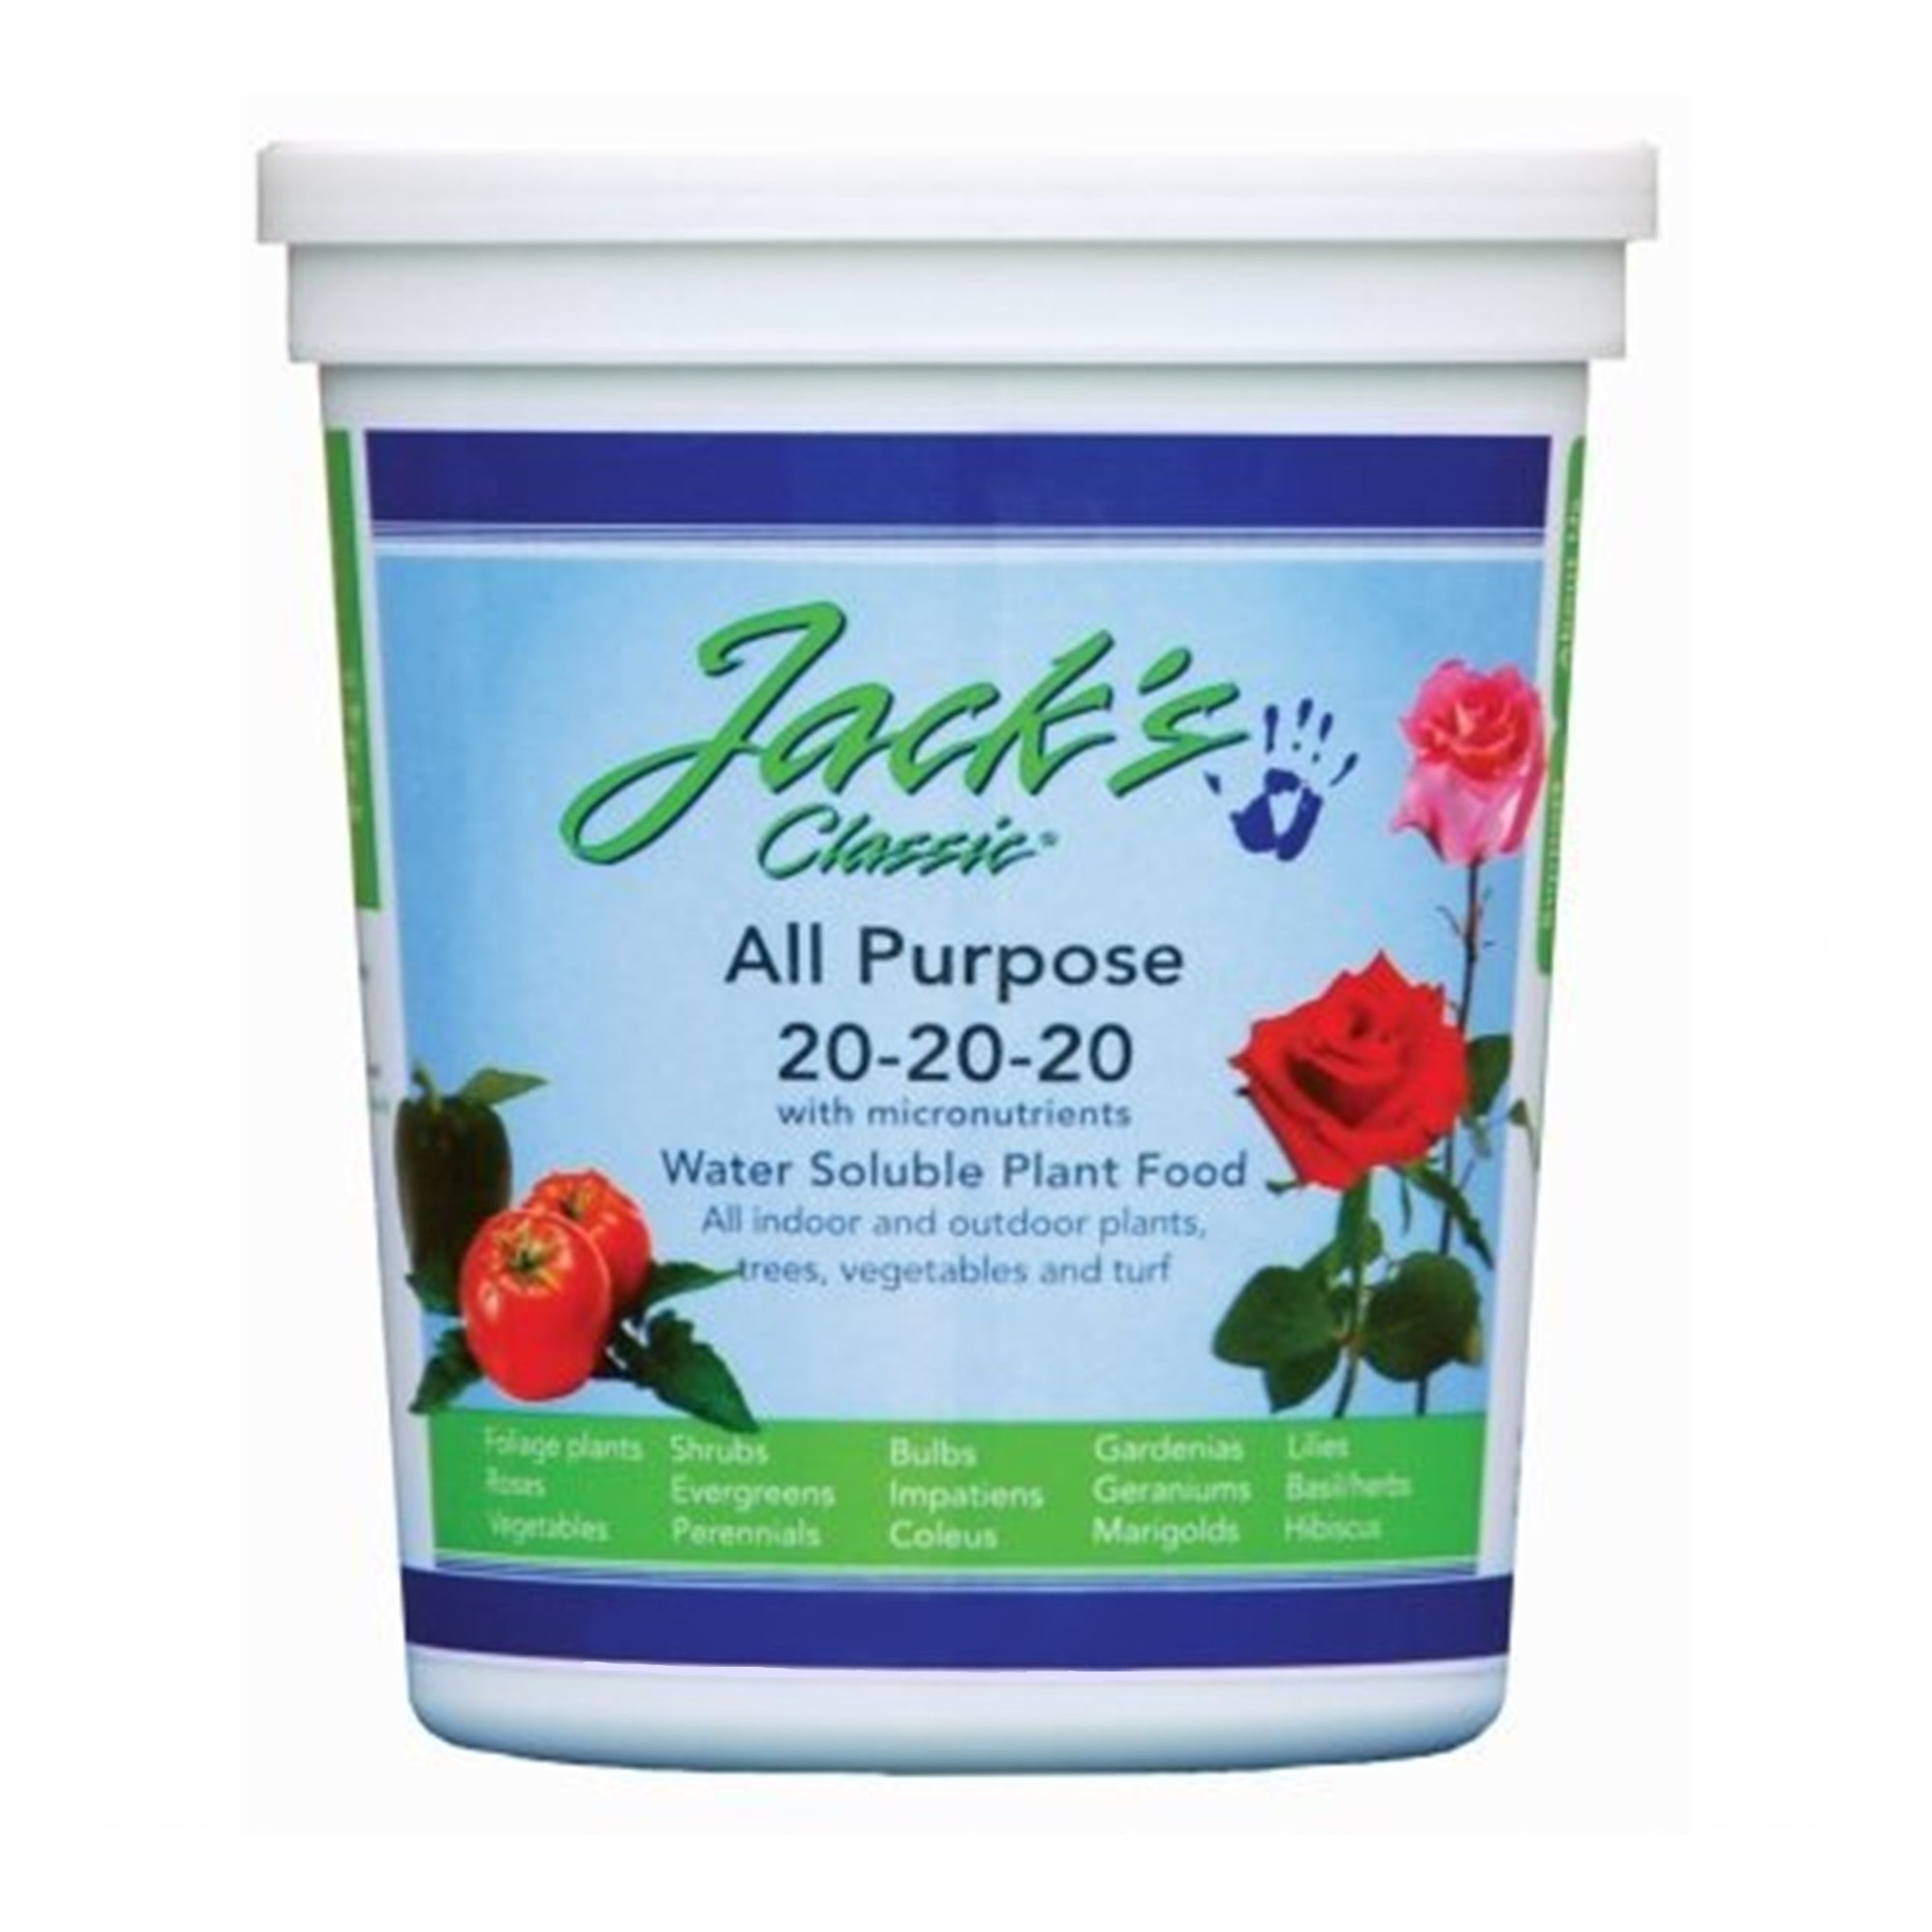 JR Peters Jack's Classic Water Soluble All Purpose Fertilizer, 20-20-20